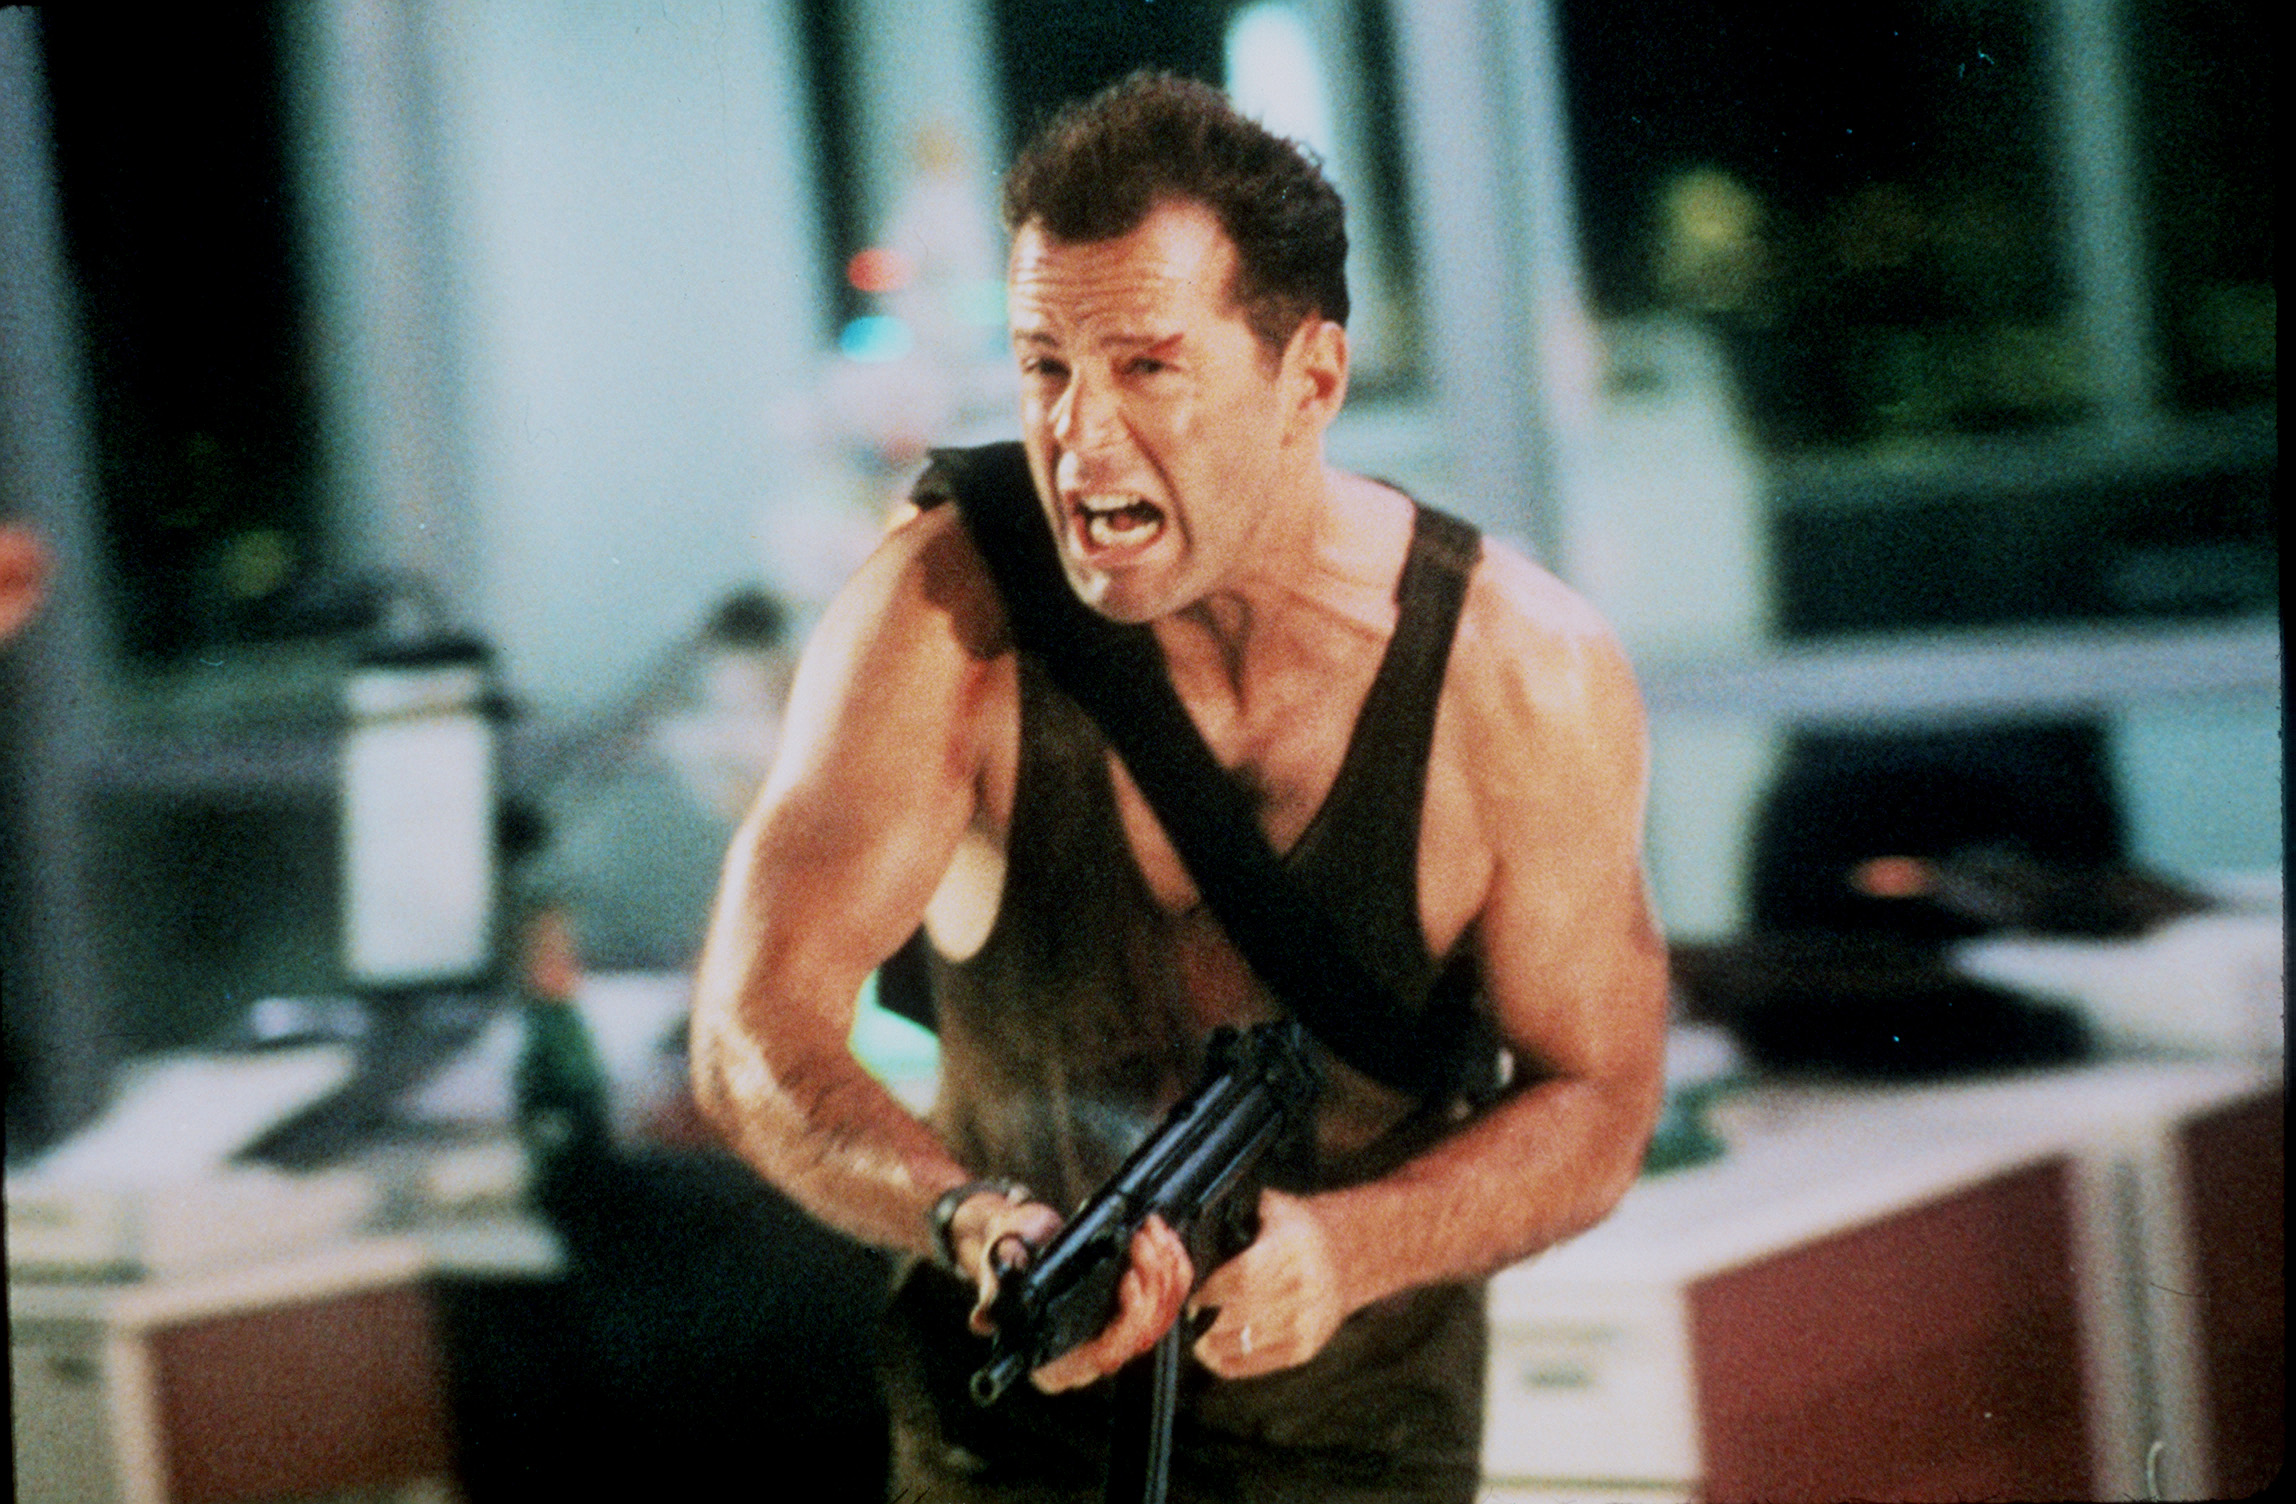 ‘Die Hard’ is a Christmas movie, and here’s the trailer to prove it